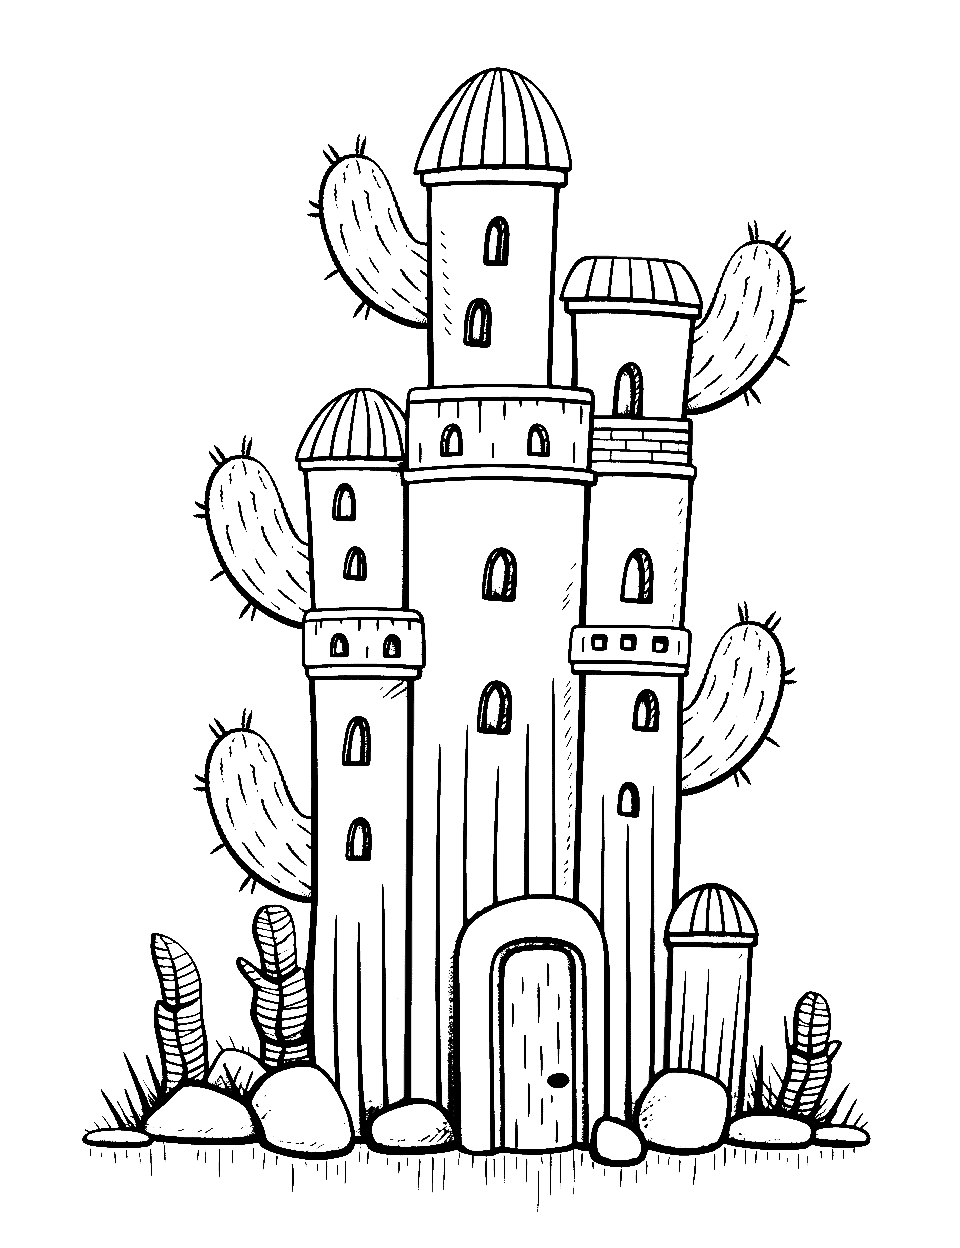 Cactus as a Castle Coloring Page - A cactus shaped like a castle, complete with features of a tower.